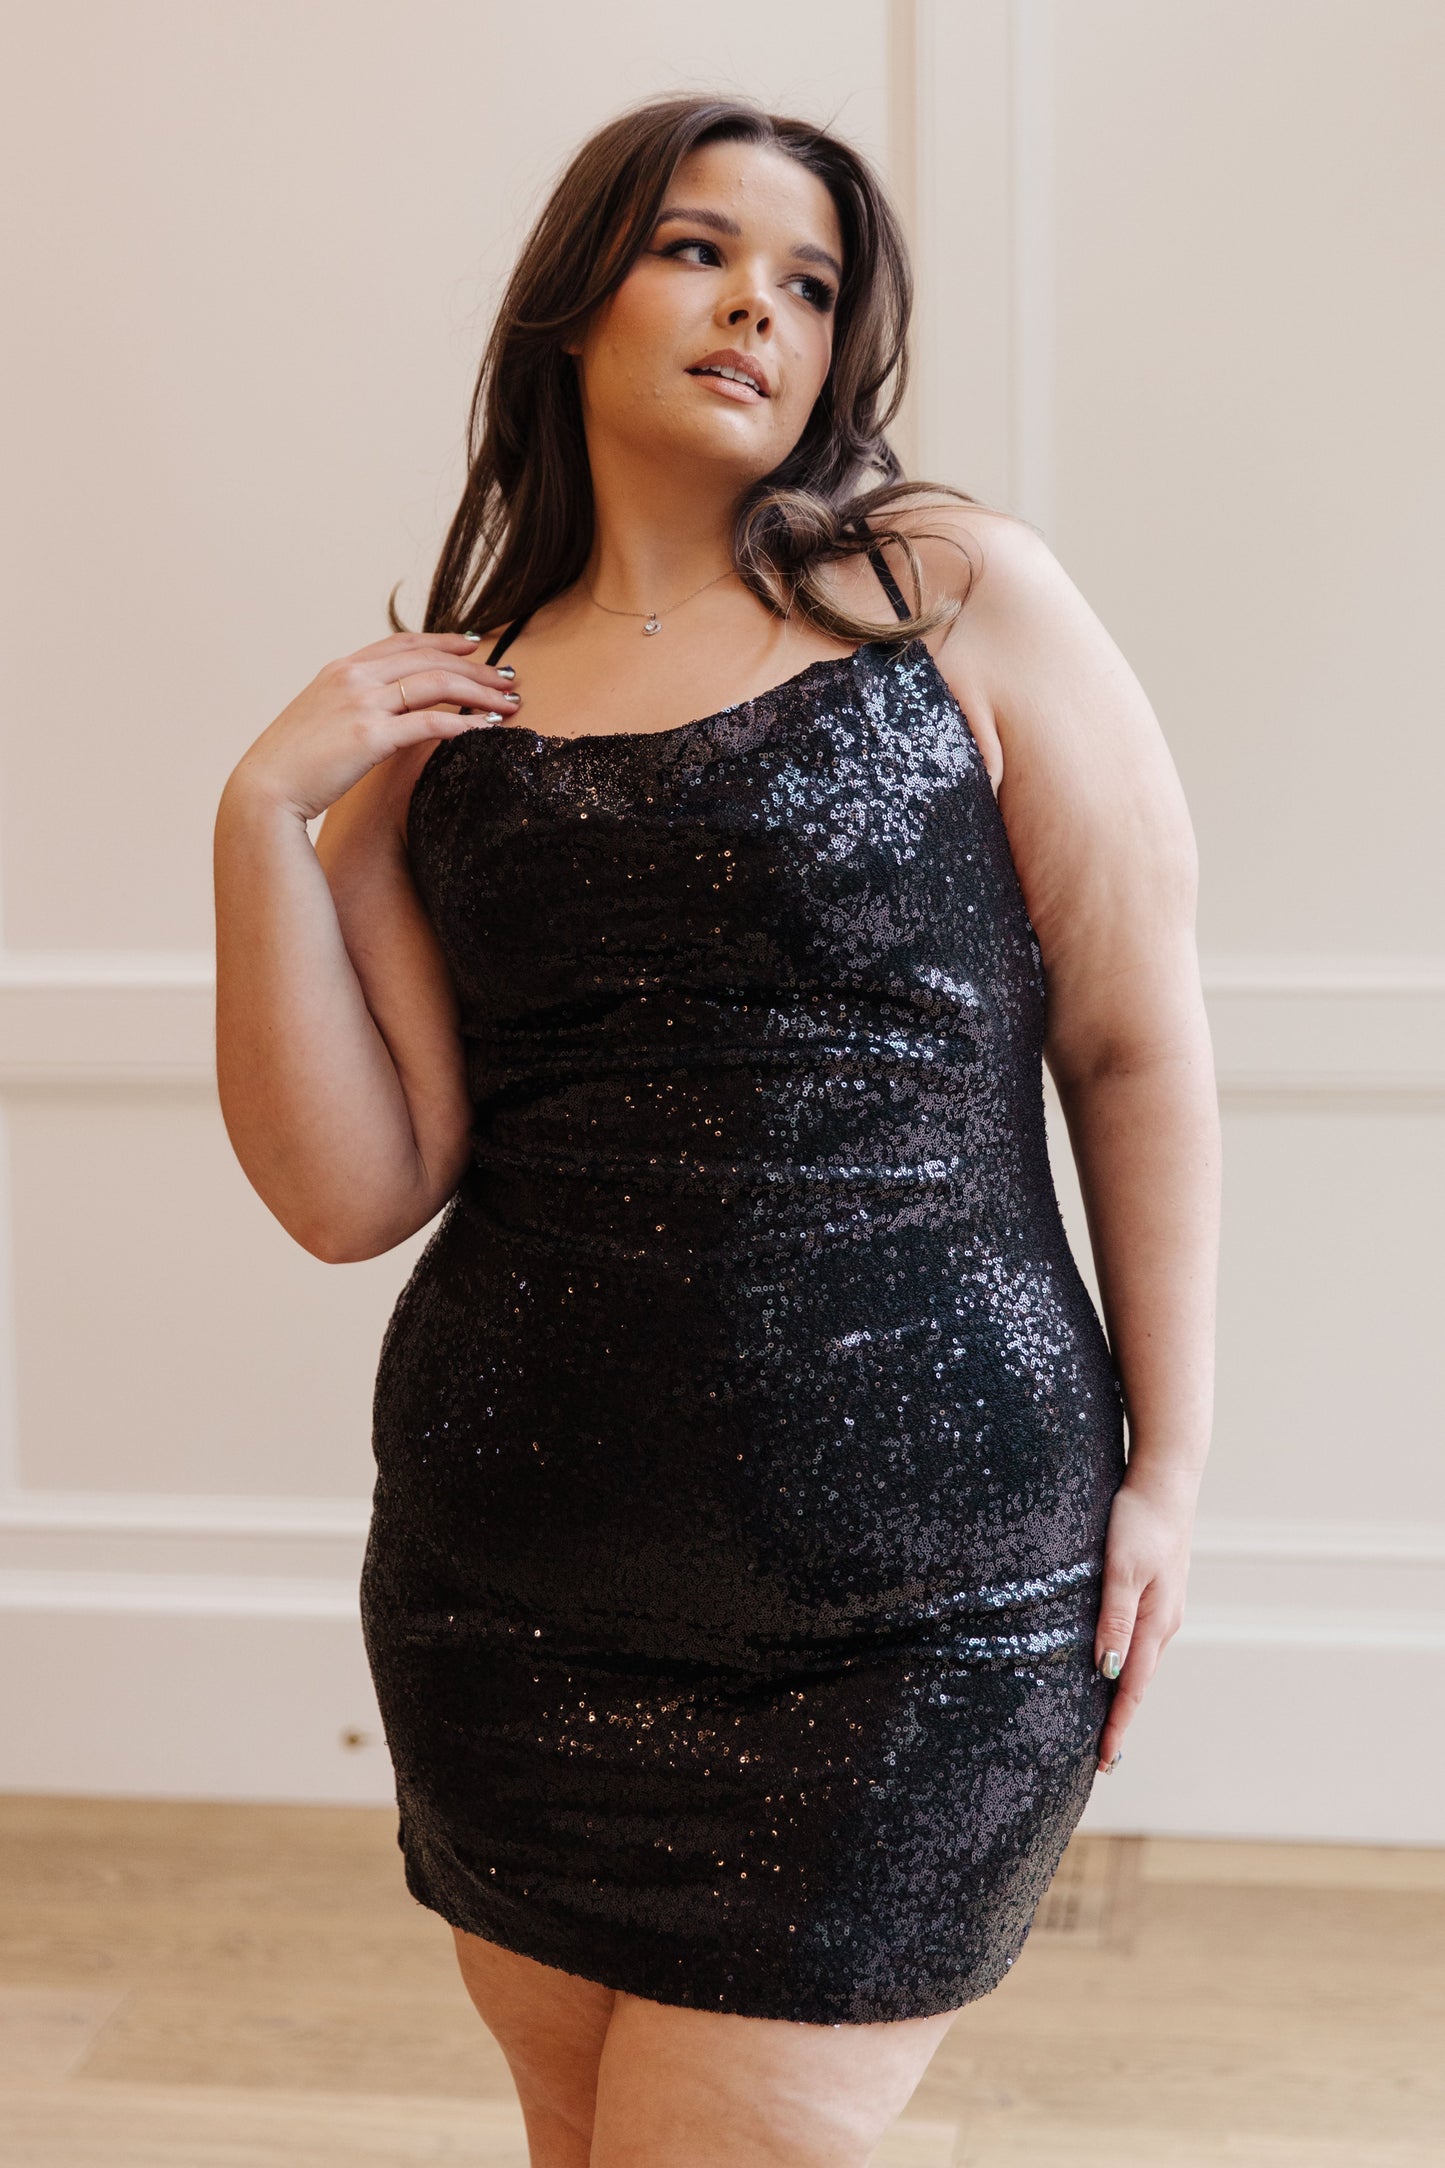 Lose Control  in Sequins Dress in Black